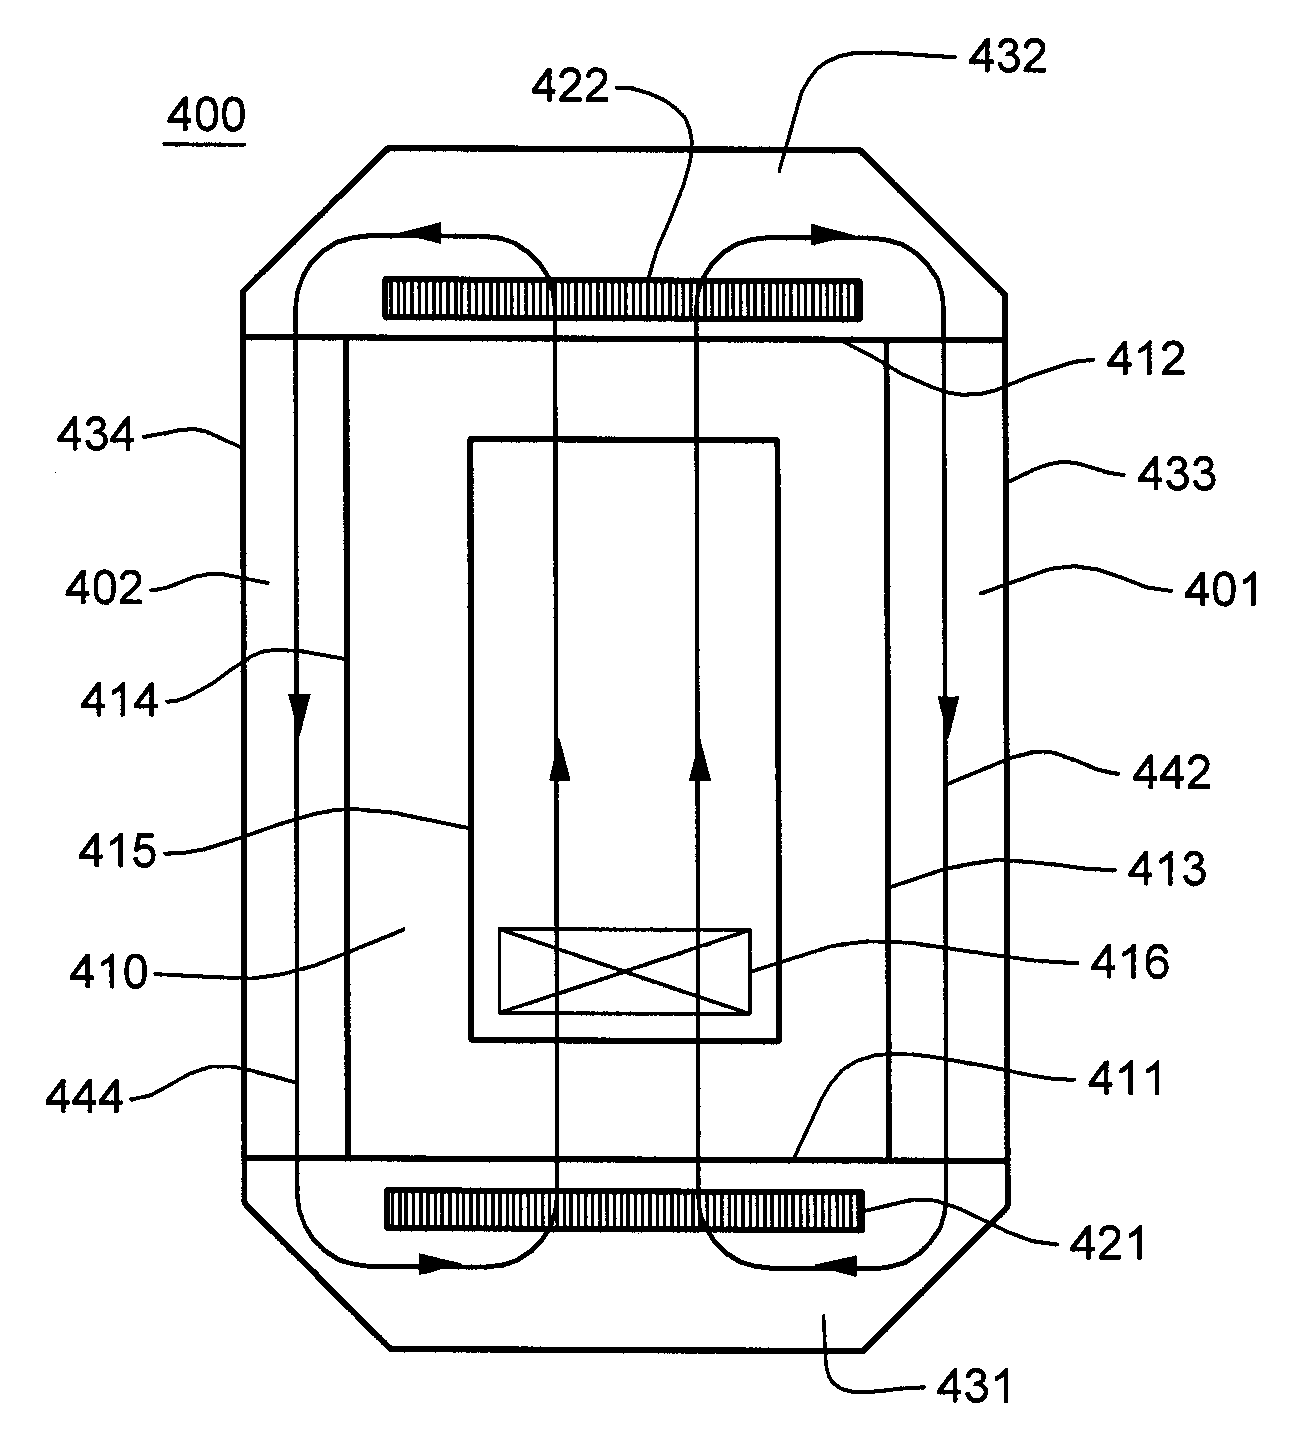 Cooled electronics system and method employing air-to-liquid heat exchange and bifurcated air flow